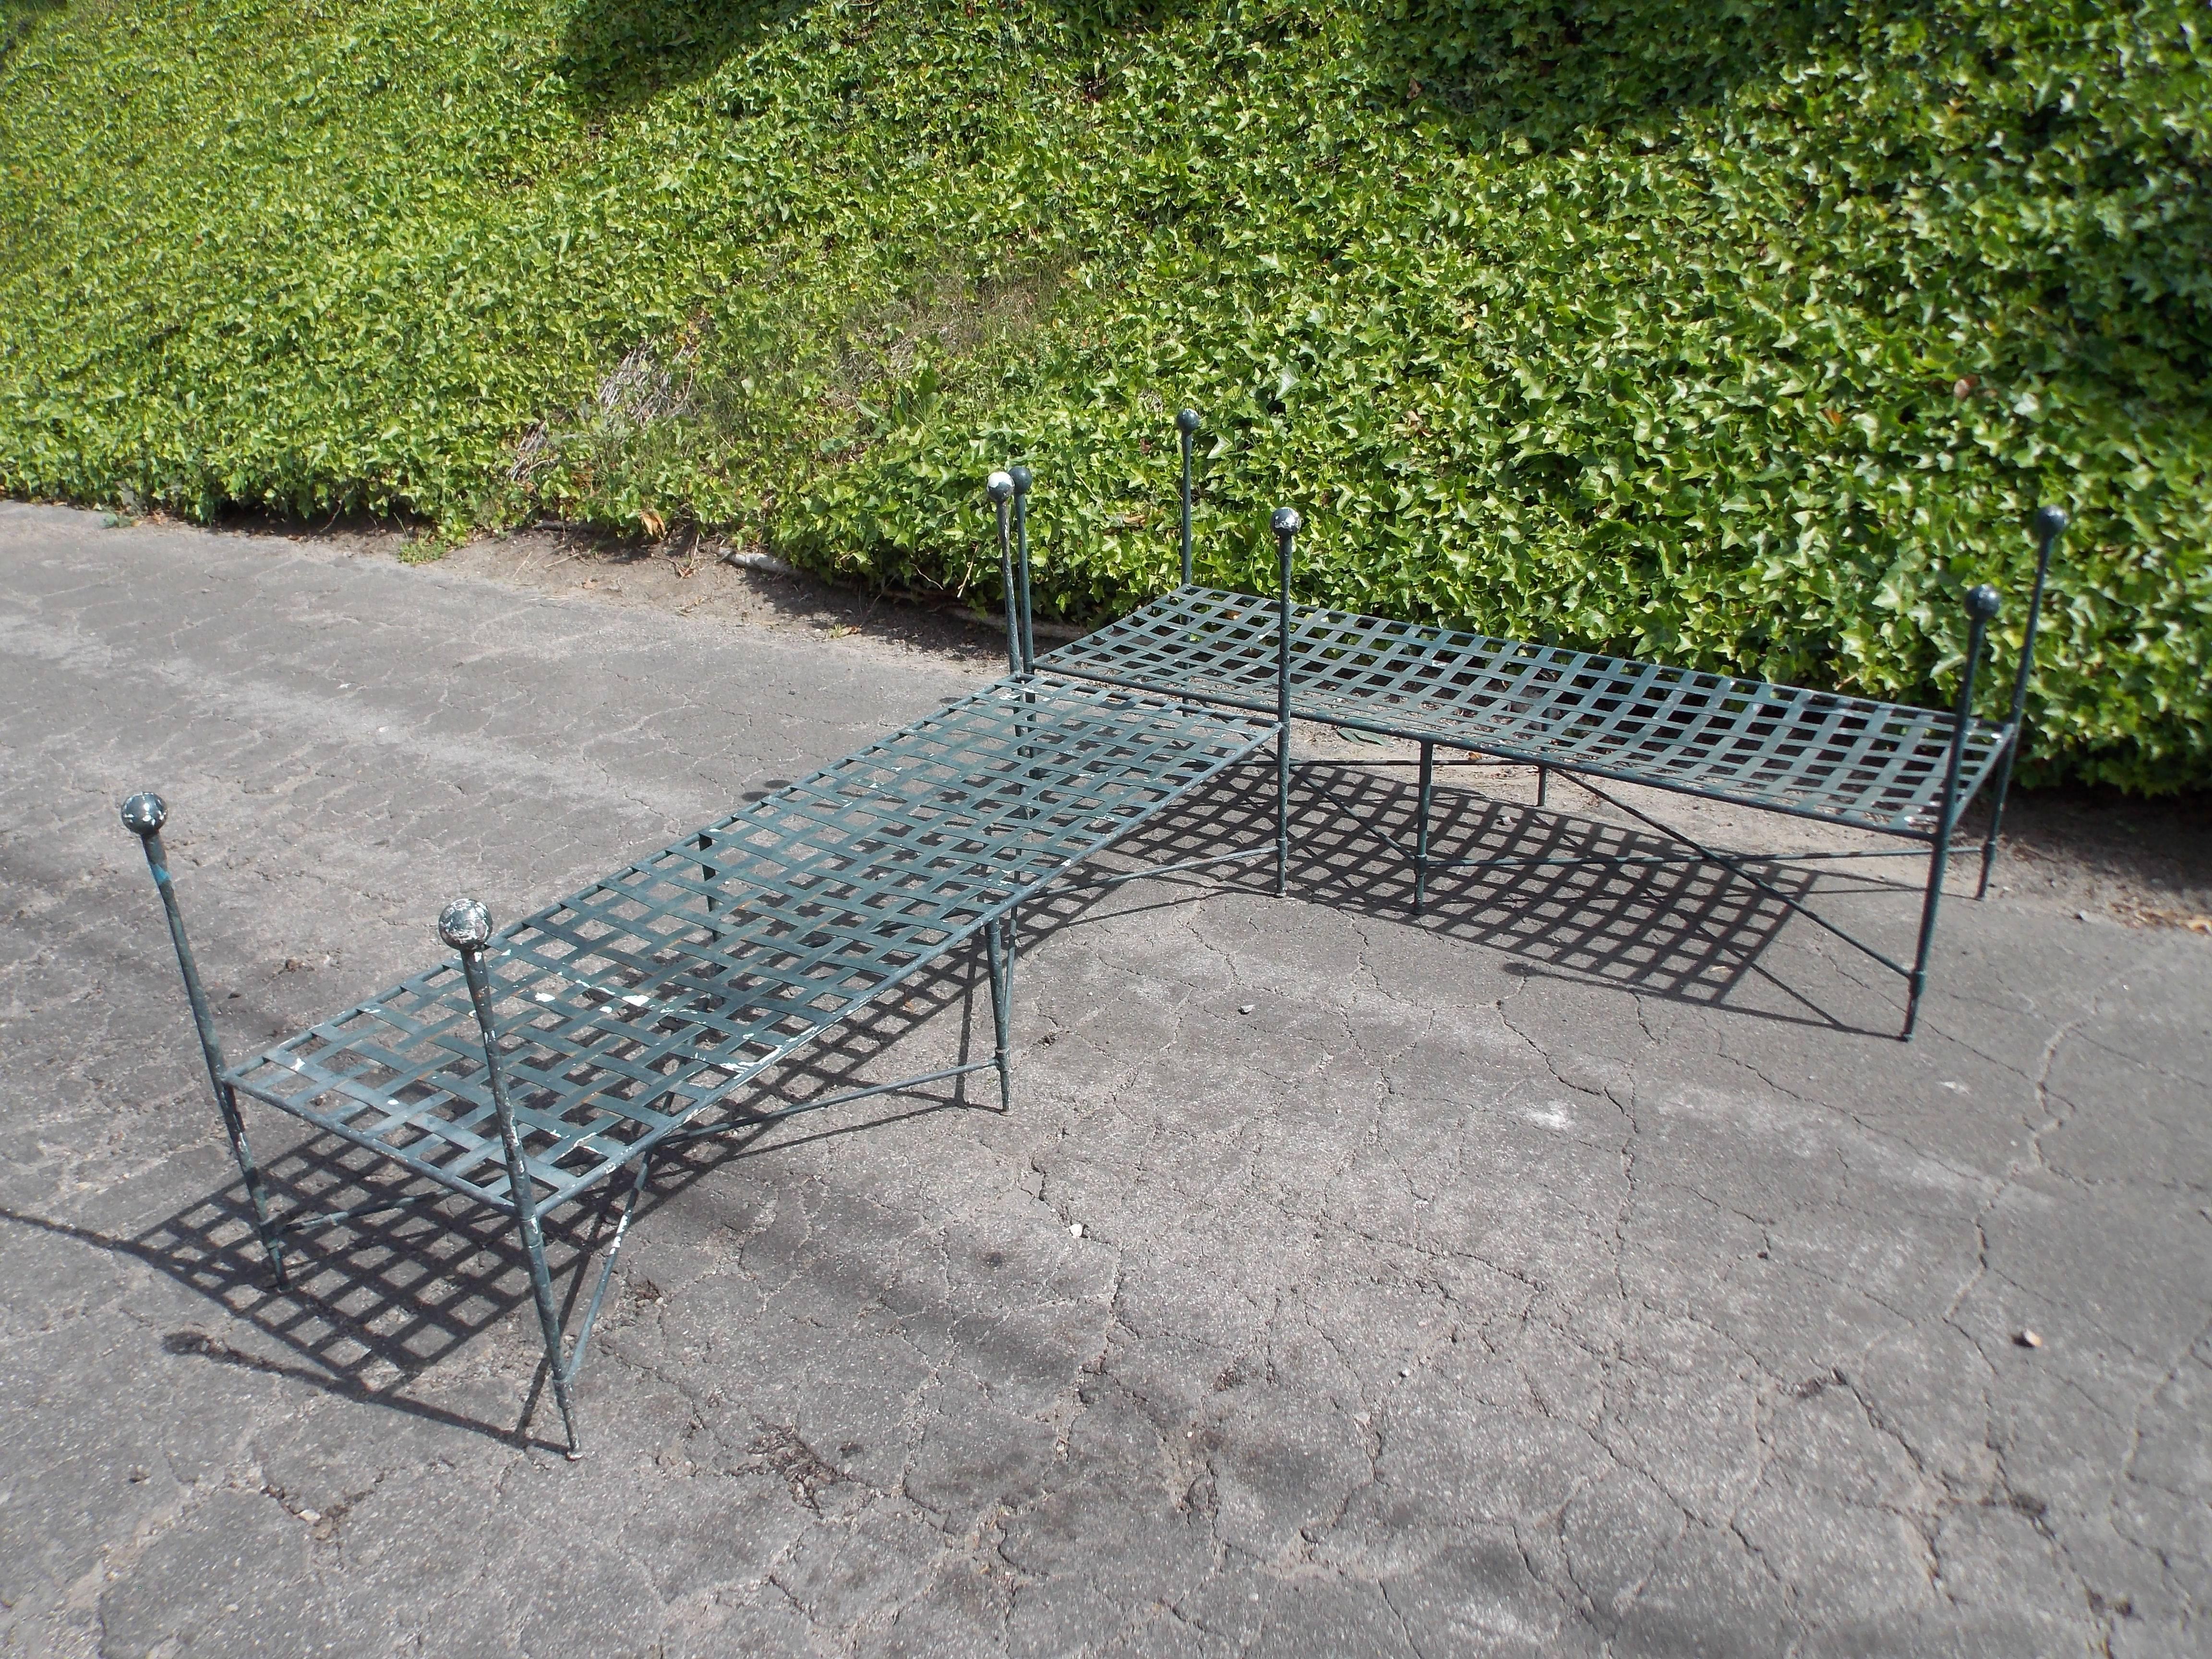 A great pair of benches.
Made of powdered coated steel.
They are in the original vintage condition.
They show ware and patina consistent with age, but no damage or repairs.
They are solid and sturdy.
These are great to use indoors or out.
 